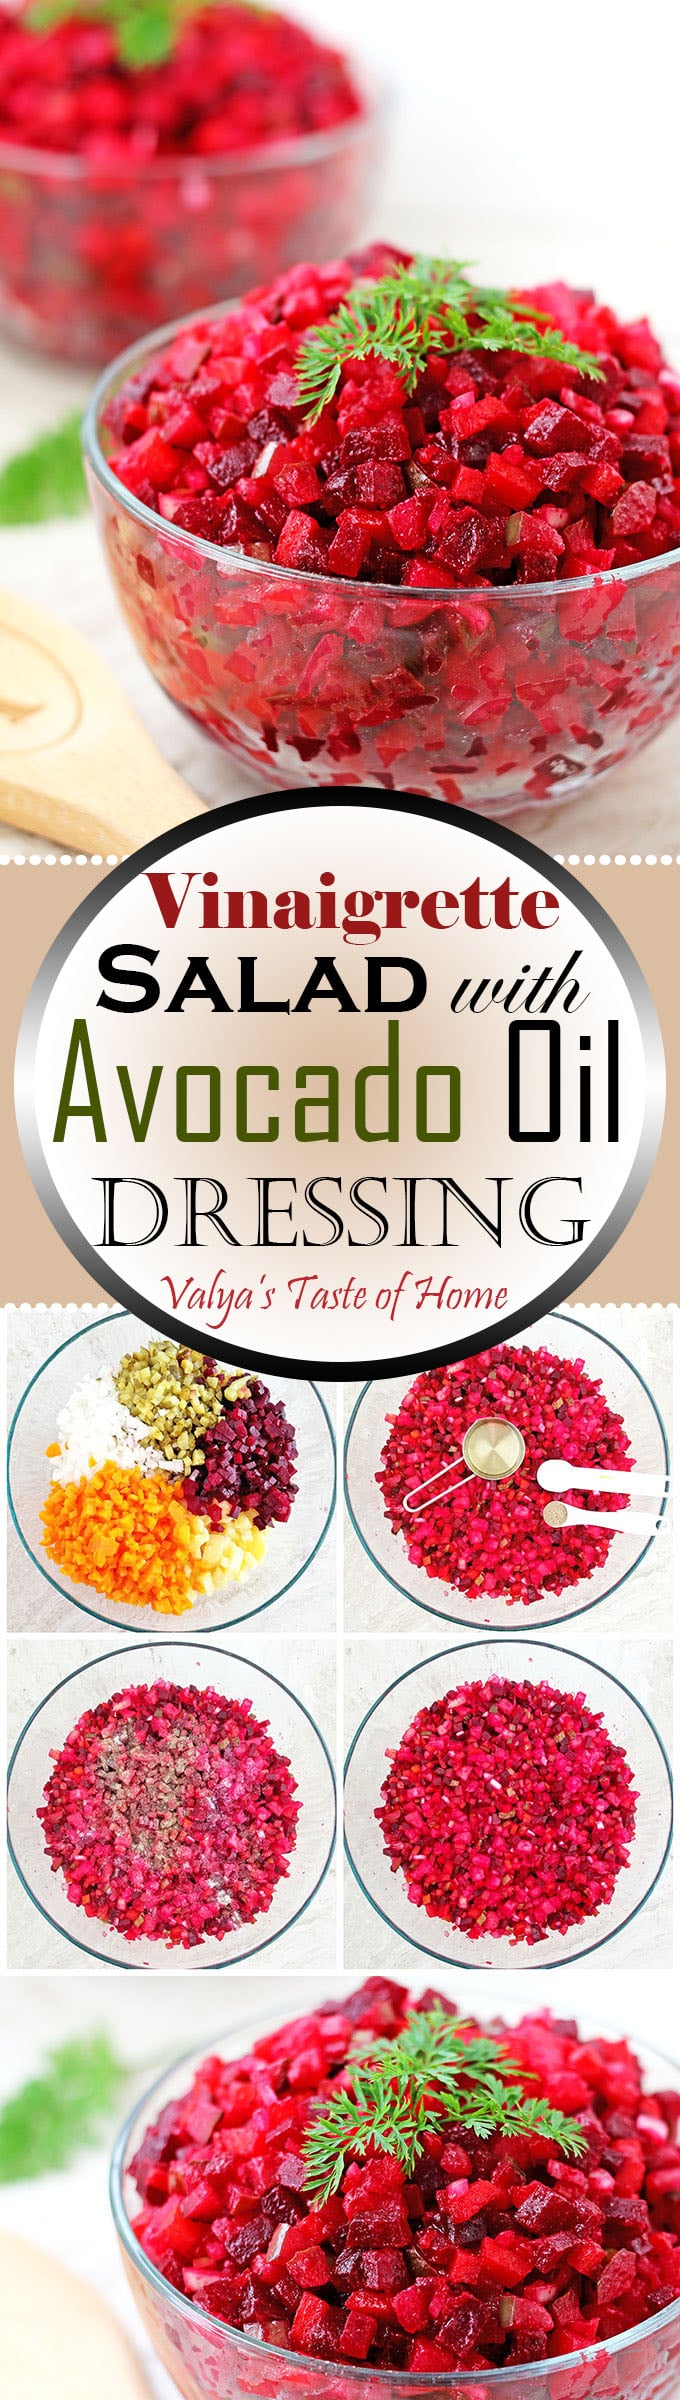 This Vinaigrette Salad with Avocado Oil Dressing (Ukrainian Red Beet Salad) is very special to me. It brings back those sweet childhood memories when my mom used to make it for her family on holidays. 